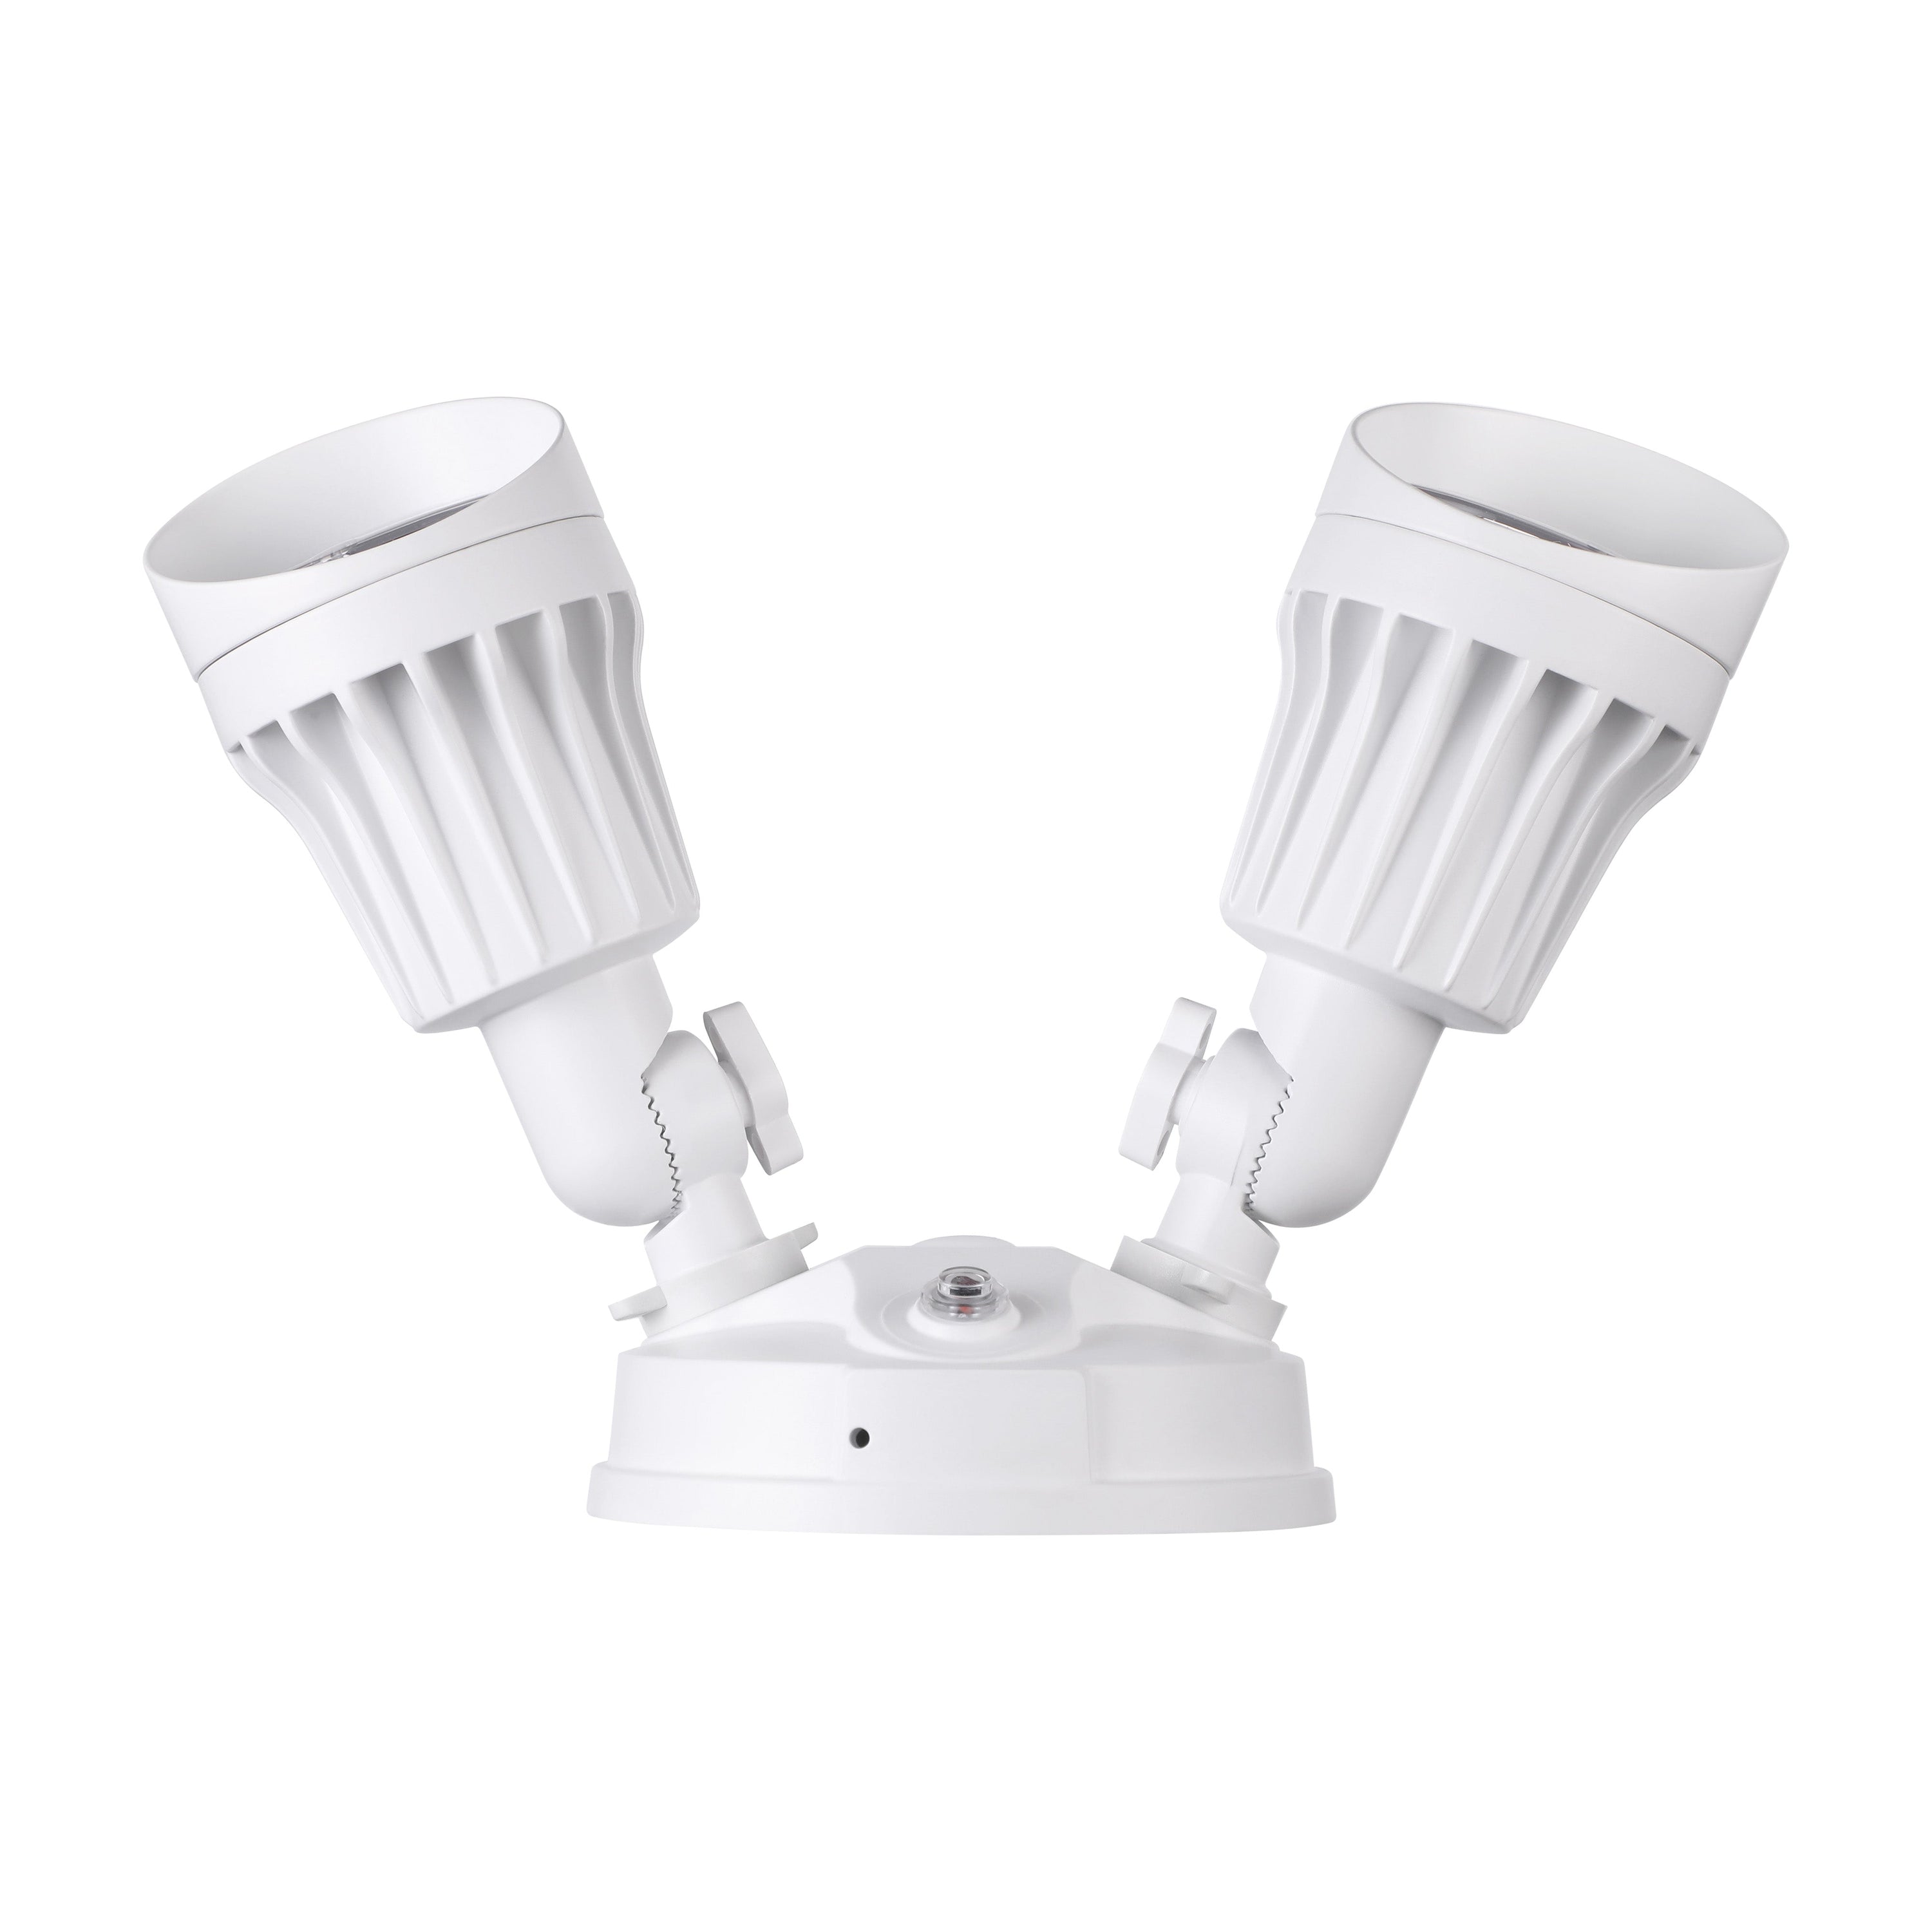 Watchman Dusk-to-Dawn 20W LED Security Lights - White - 3000K/5000K